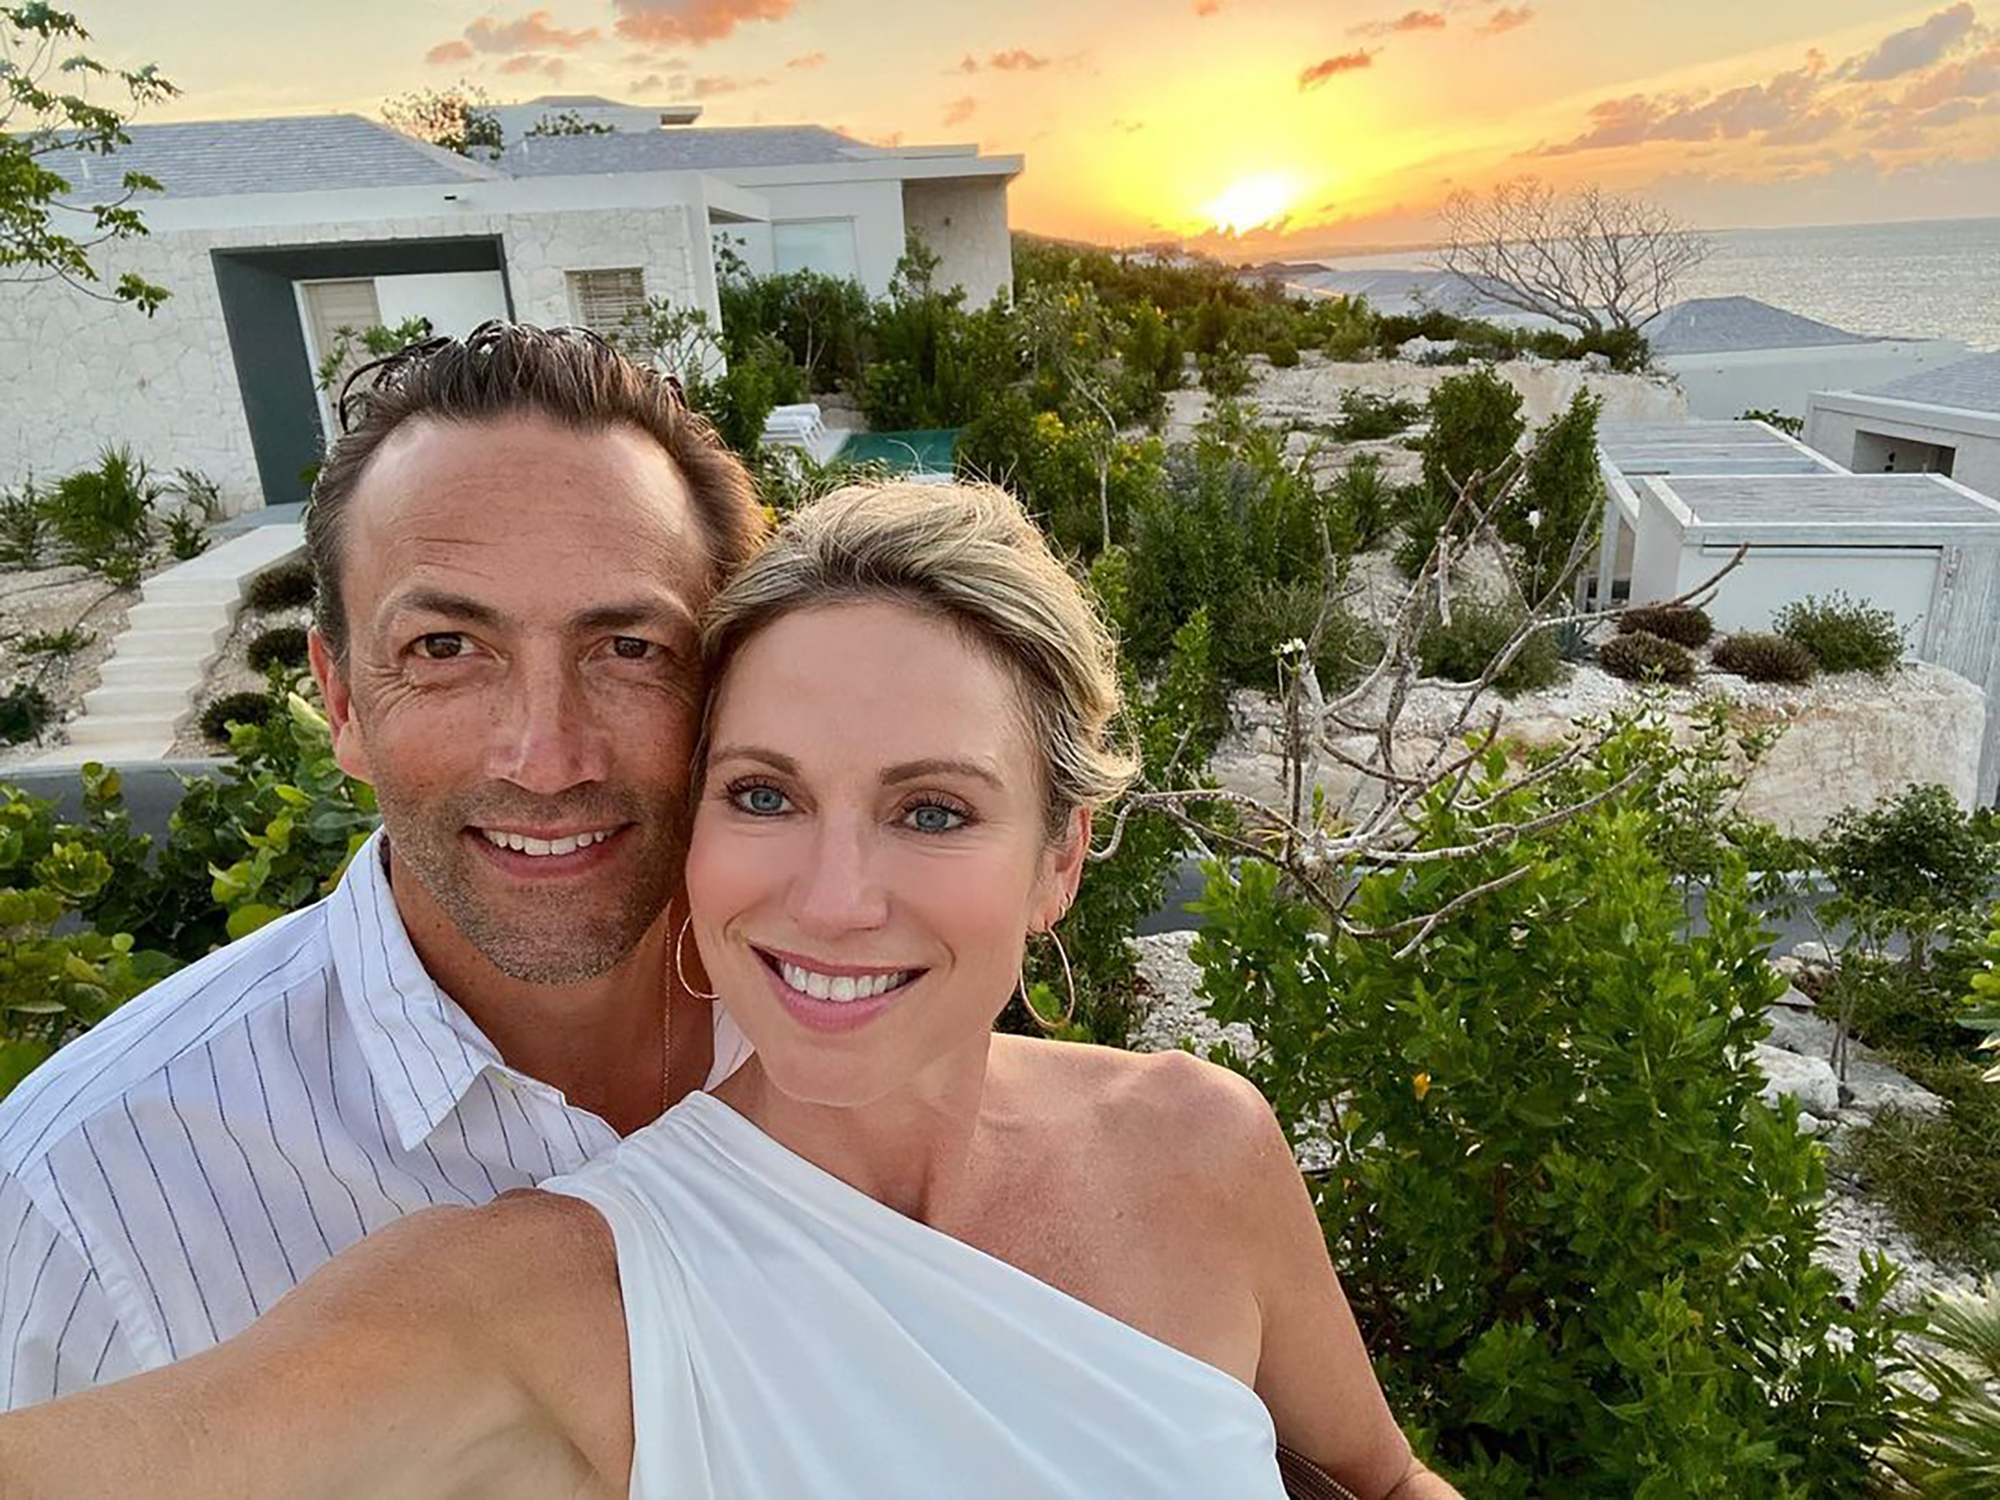 Andrew shue deletes photos of wife amy robach amid tj holmes scandal